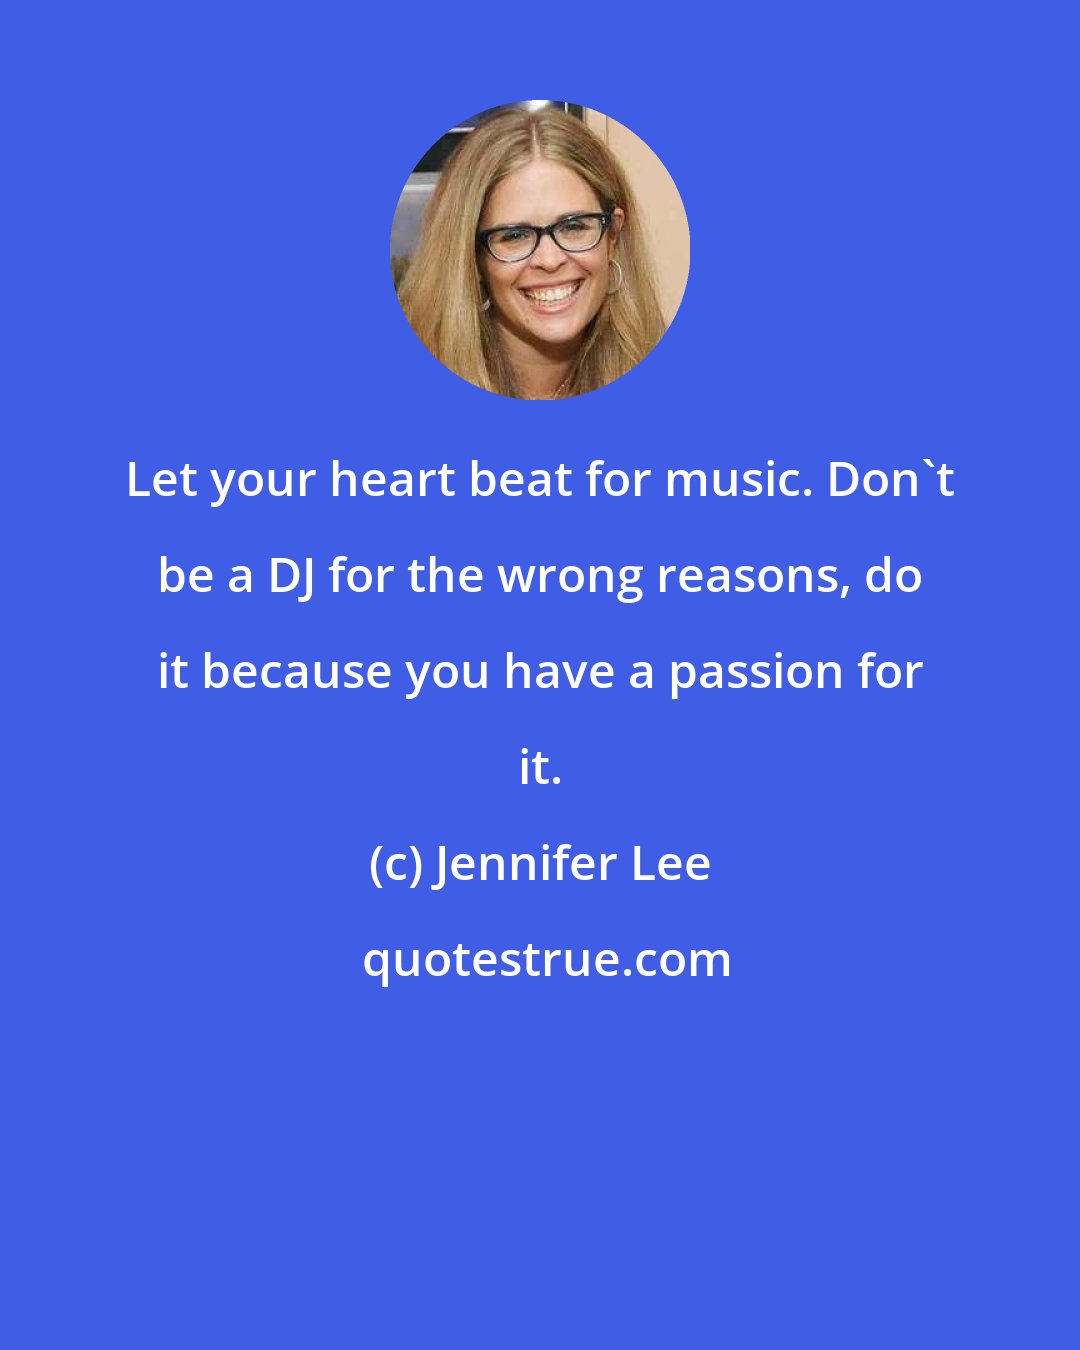 Jennifer Lee: Let your heart beat for music. Don't be a DJ for the wrong reasons, do it because you have a passion for it.